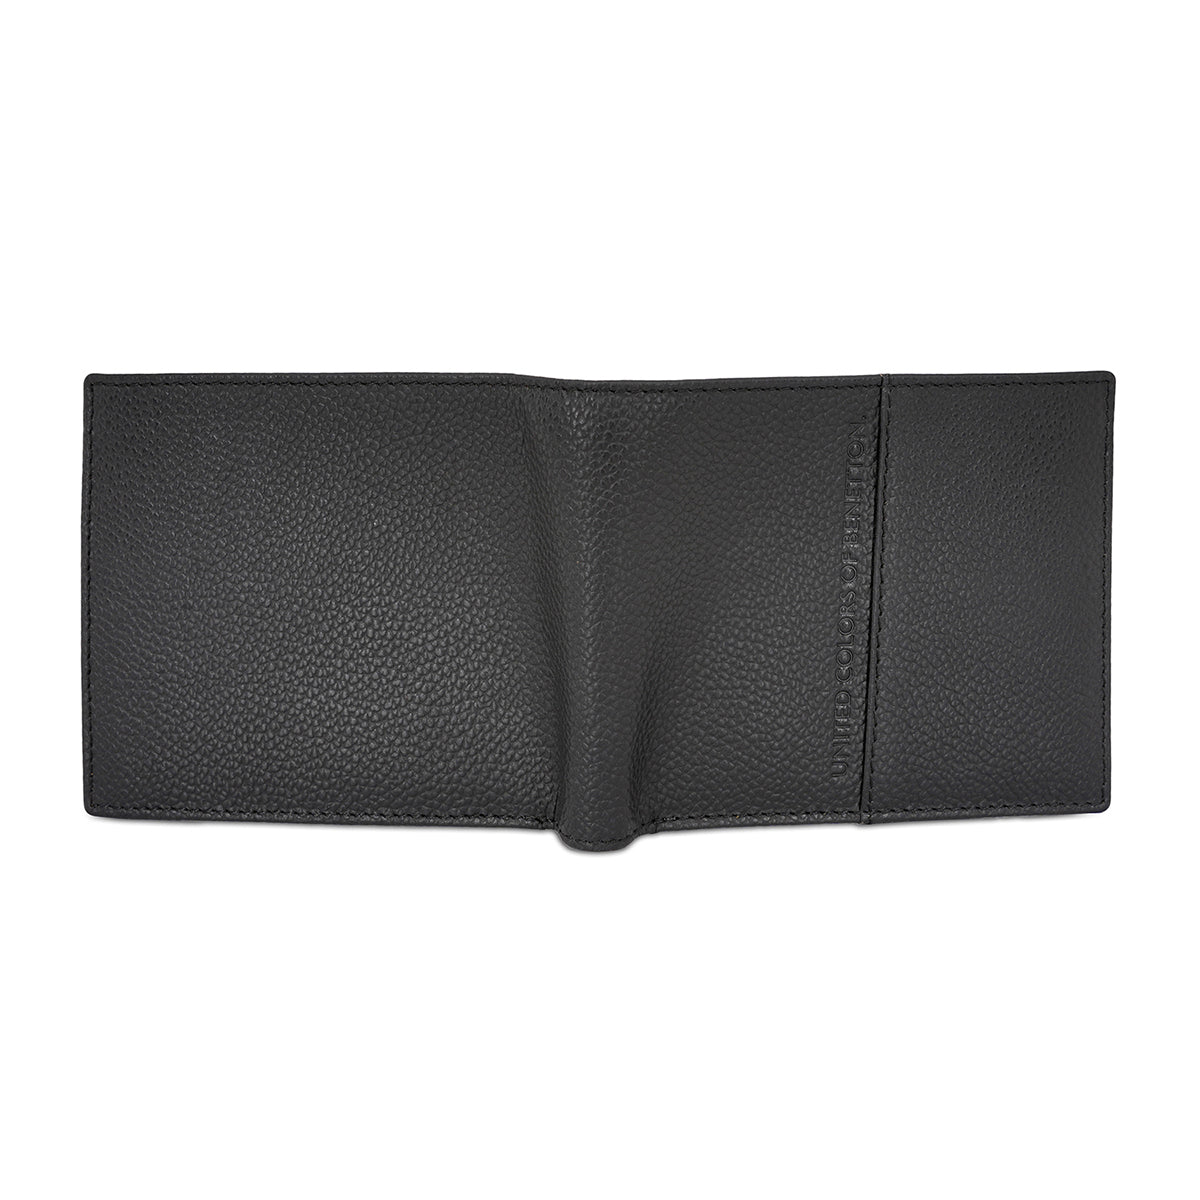 United Colors of Benetton Jayce Global Coin Wallet Black